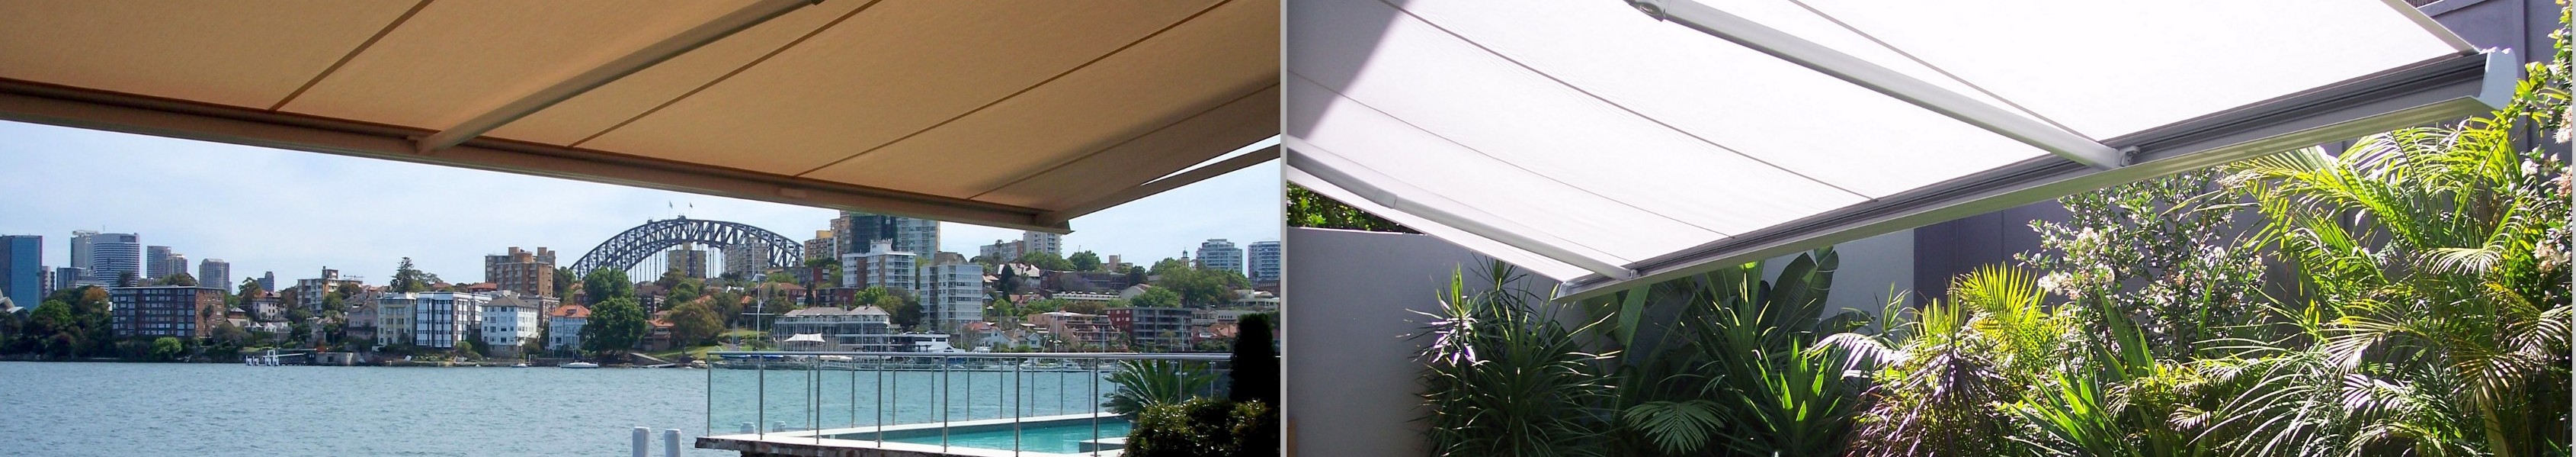 Roll Out Motorised Awnings Folding Arm Awnings Ozsun Shade Systems